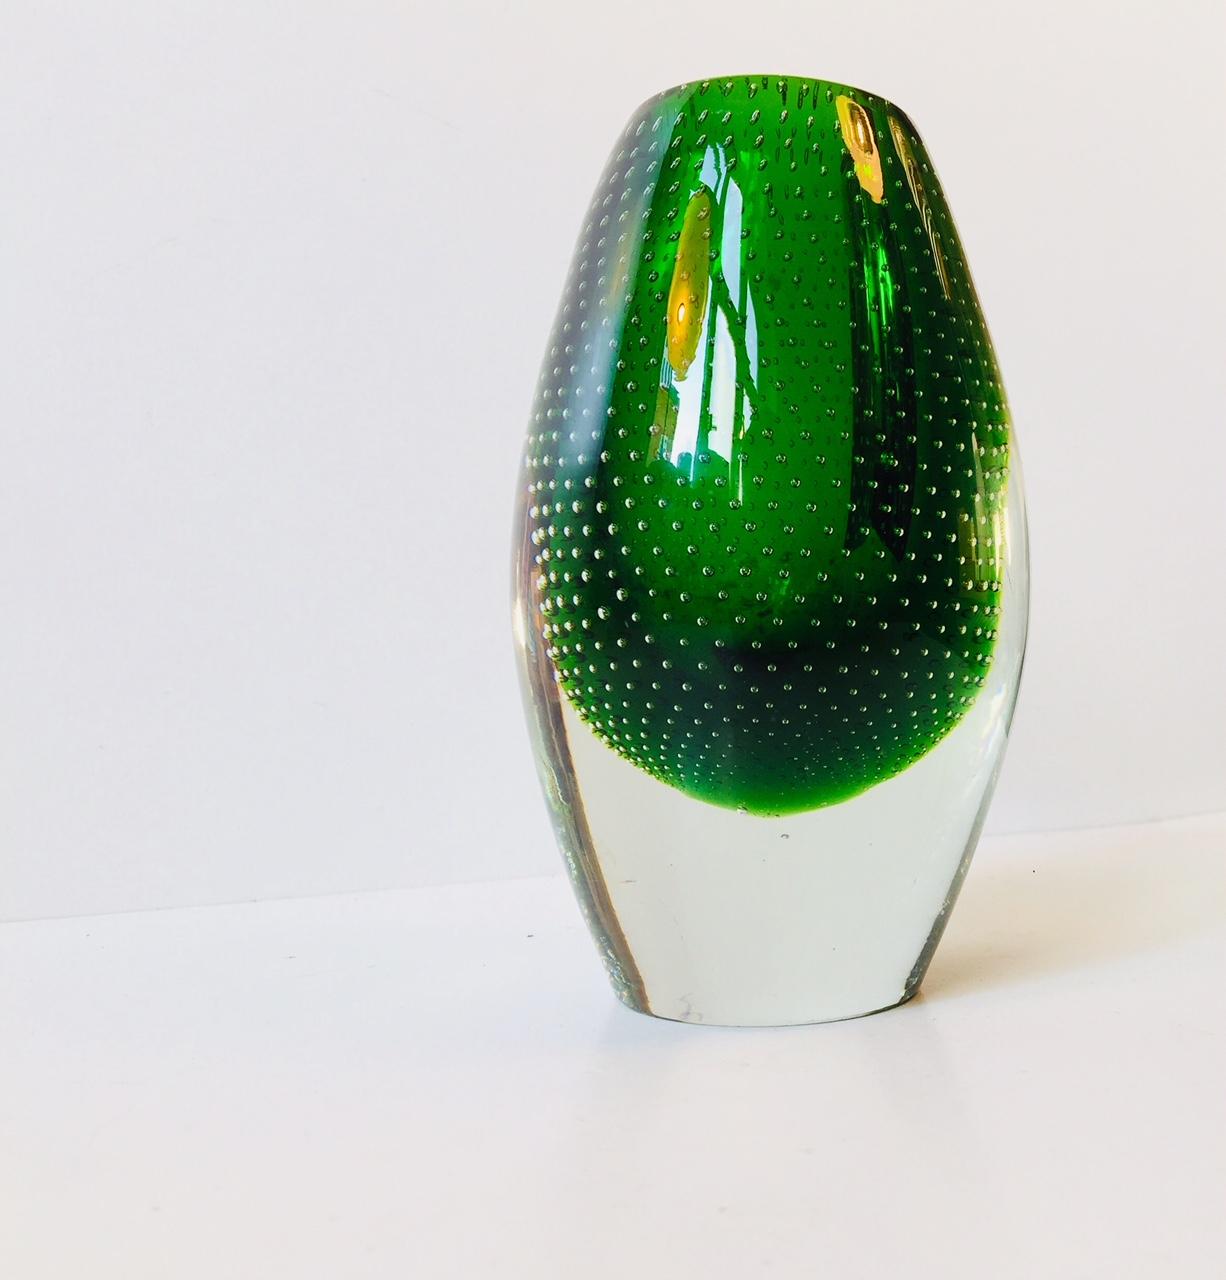 Green Sommerso vase designed by Jacob E. Bang. It is made from hand blown clear and green glass featuring tiny controlled air bubbles created using a small syringe. It was manufactured at Kastrup/Holmegaard during the 1950s. The vase is not signed,